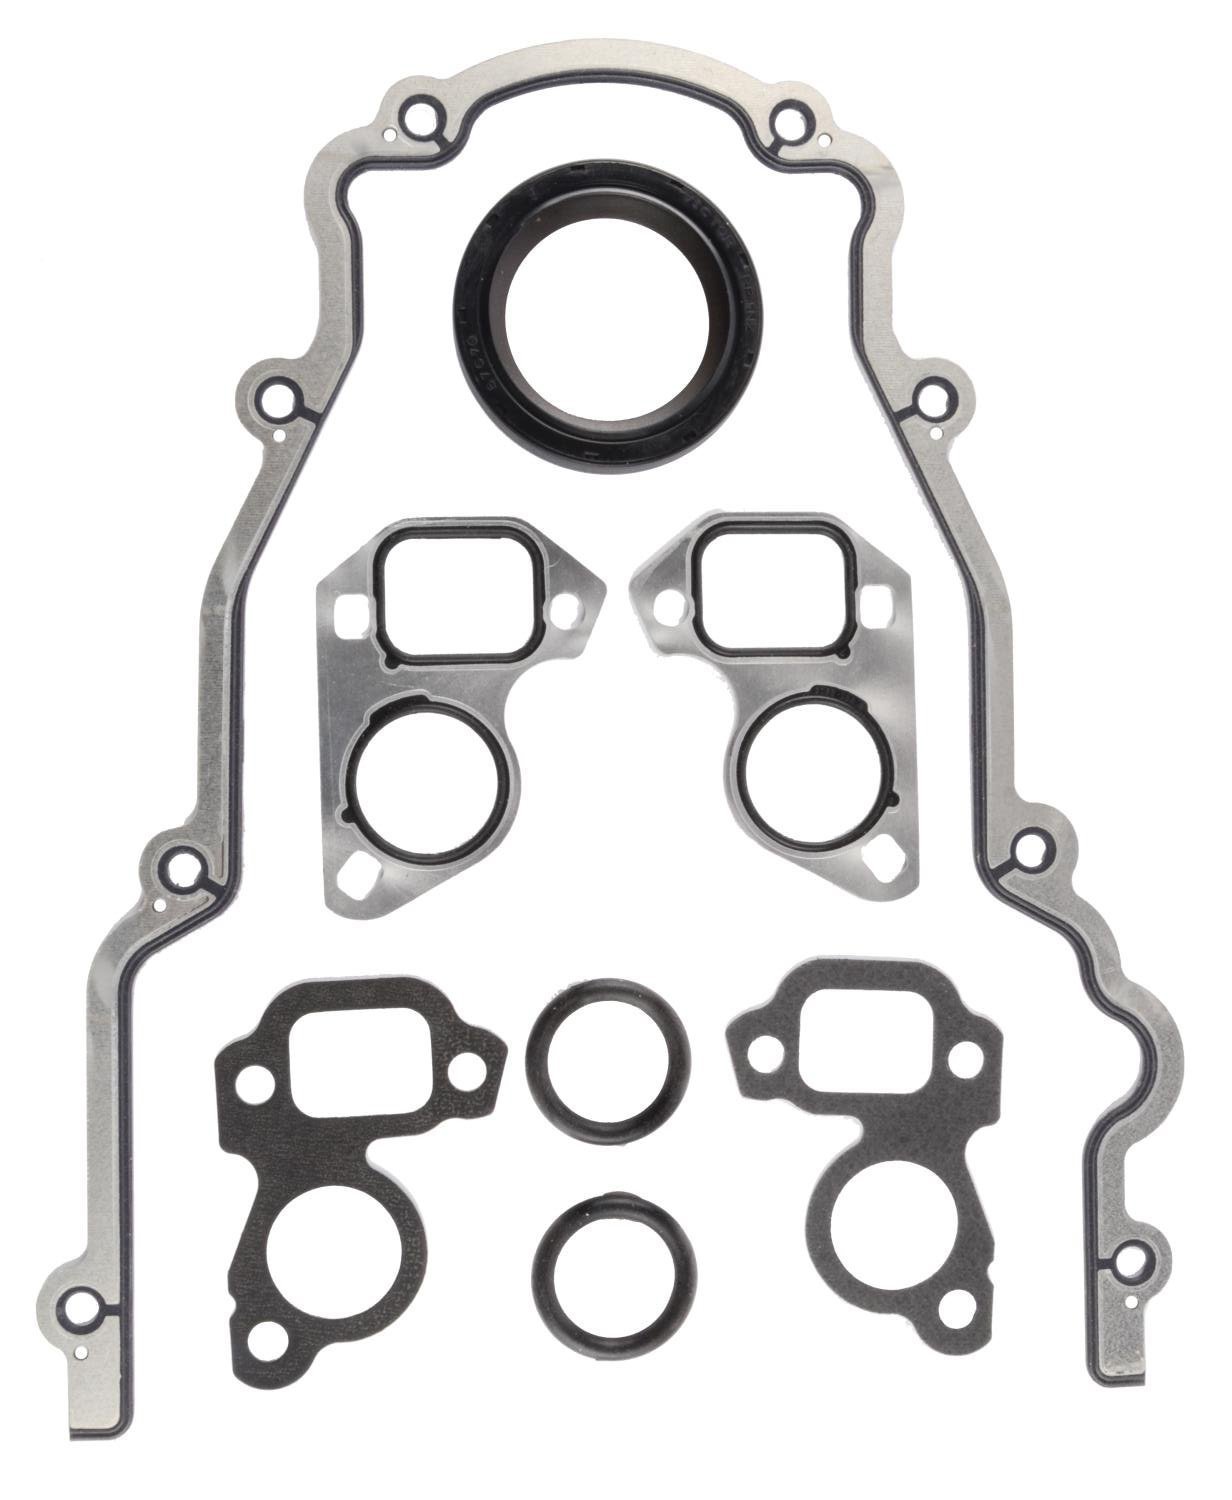 Timing Cover Gasket Set for 1997-2013 GM LS Engines